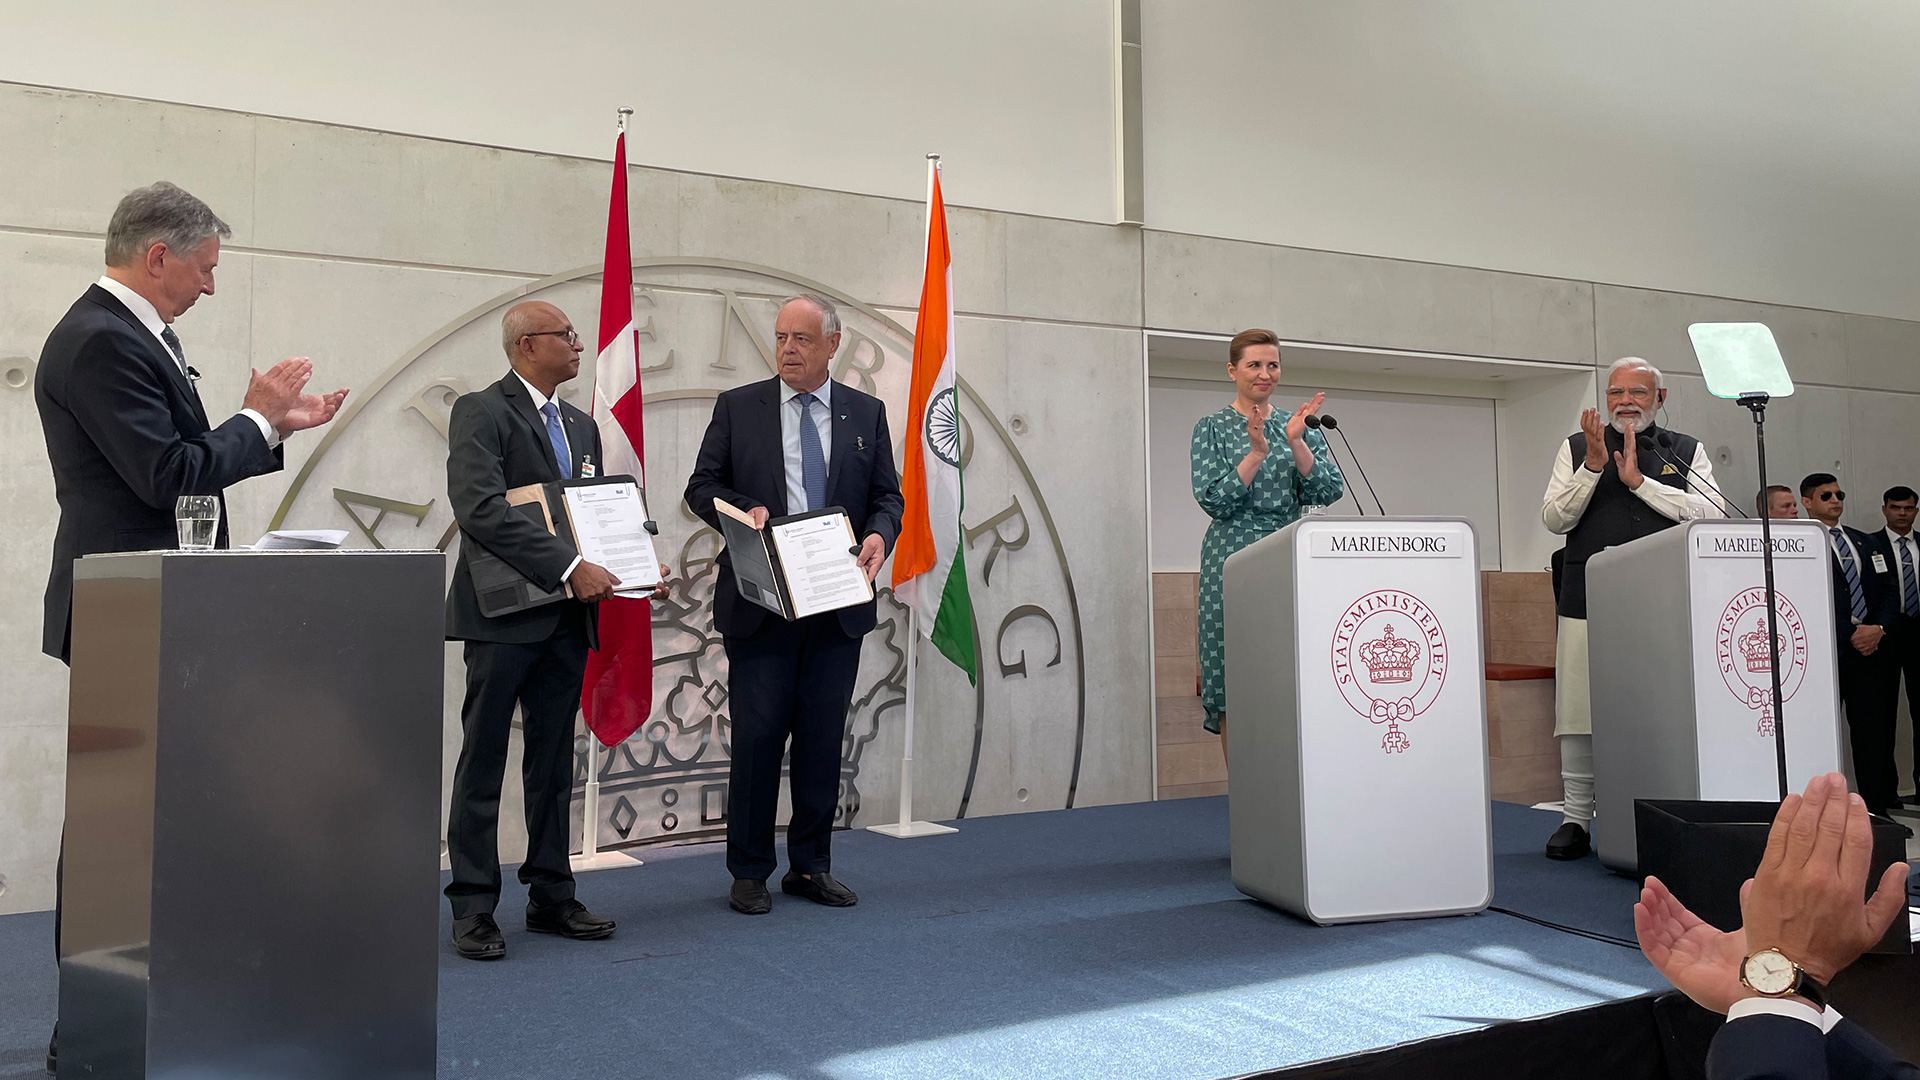 Niels Aage Kjaer with L&T, Mette Frederiksen and PM Modi for signing of MOU